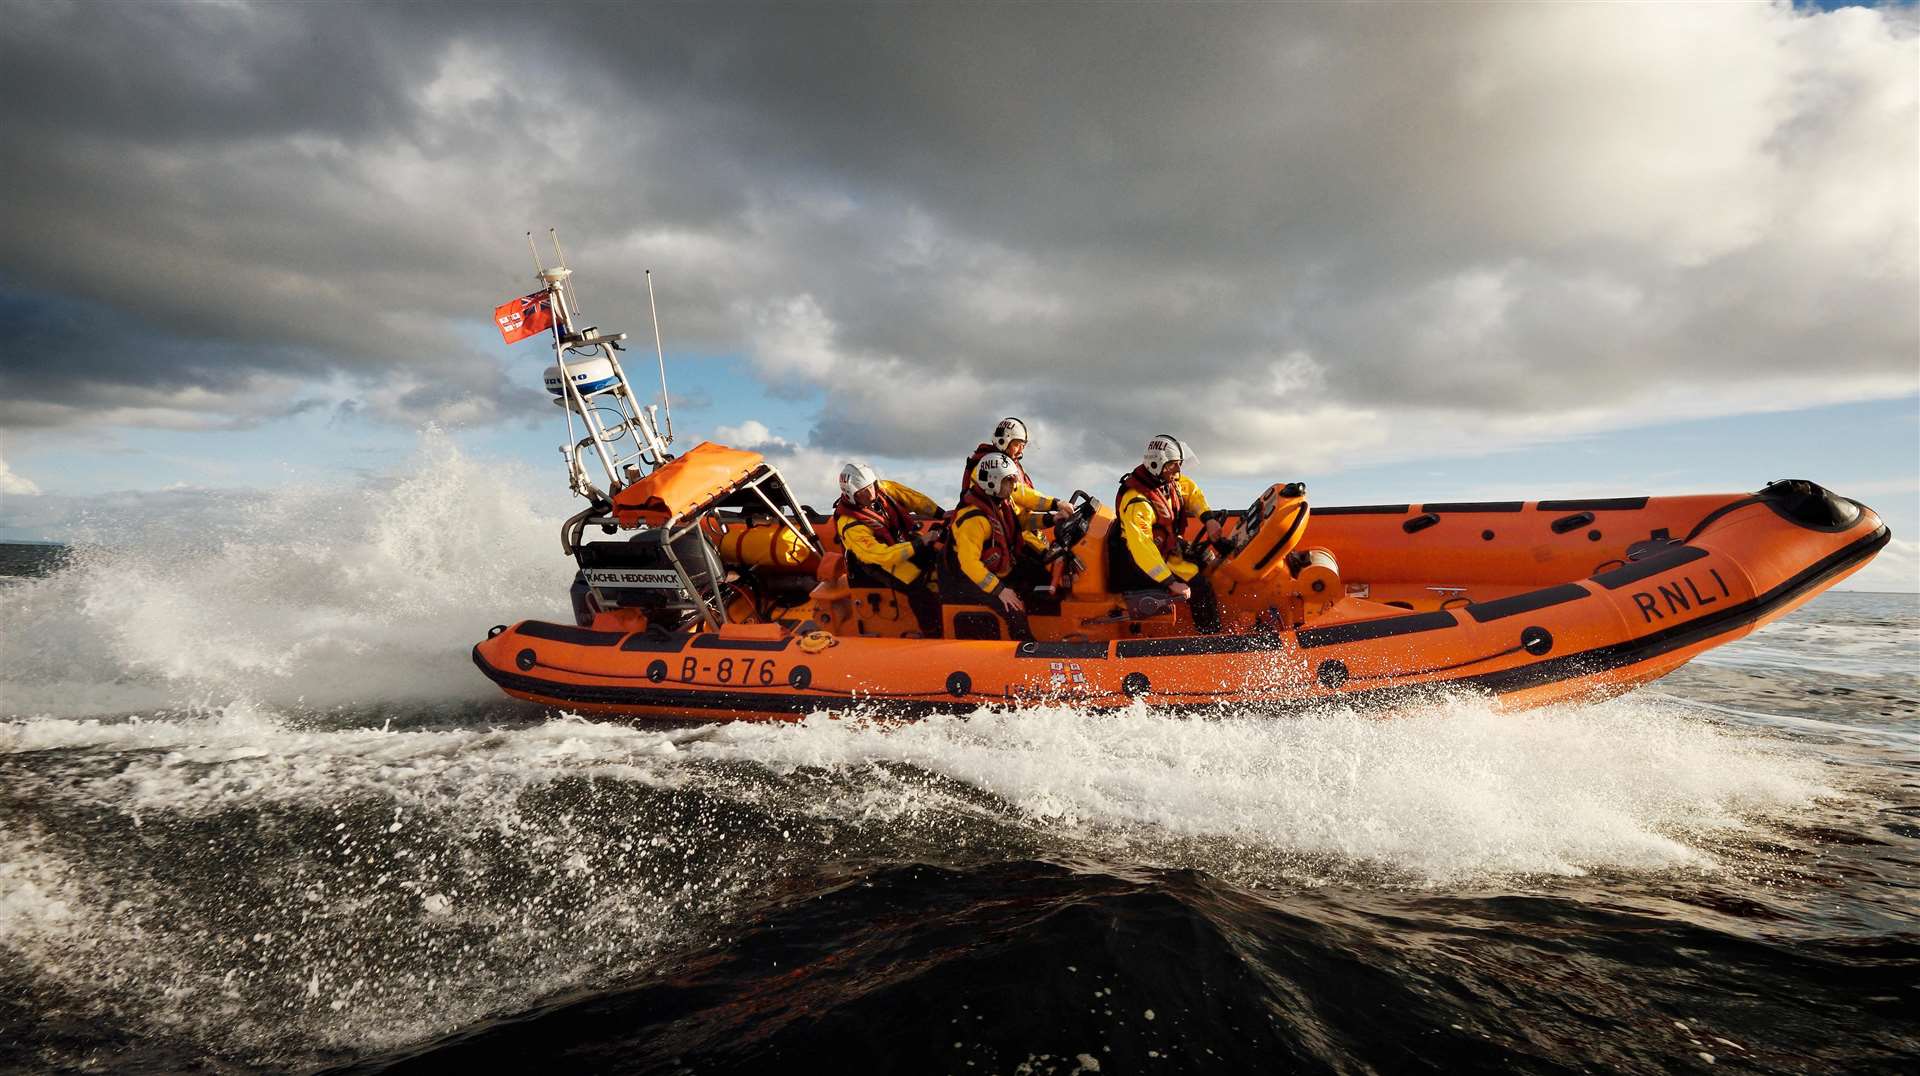 RNLI 200 is a new exhibition opening this year at the Historic Dockyard in Chatham. Picture: RNLI